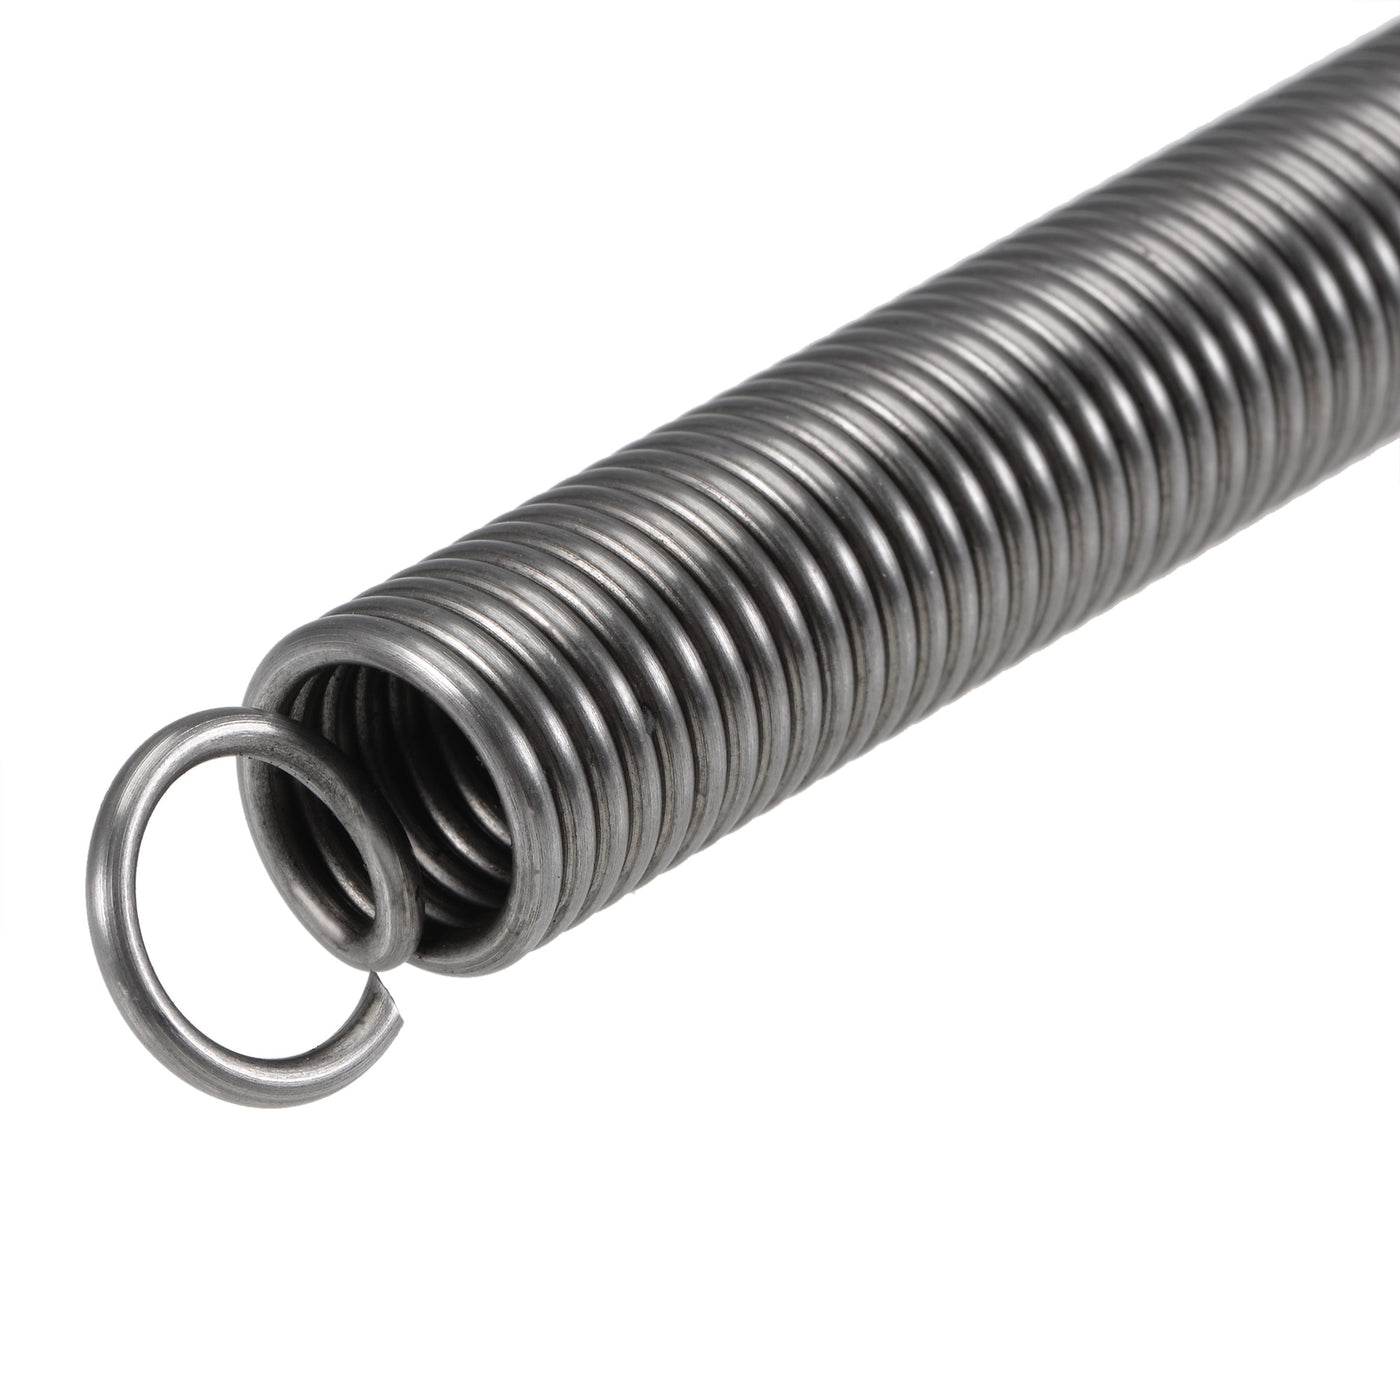 Uxcell Uxcell 2mmx16mmx300mm Extended Compression Spring ,33Lbs Load Capacity,Grey